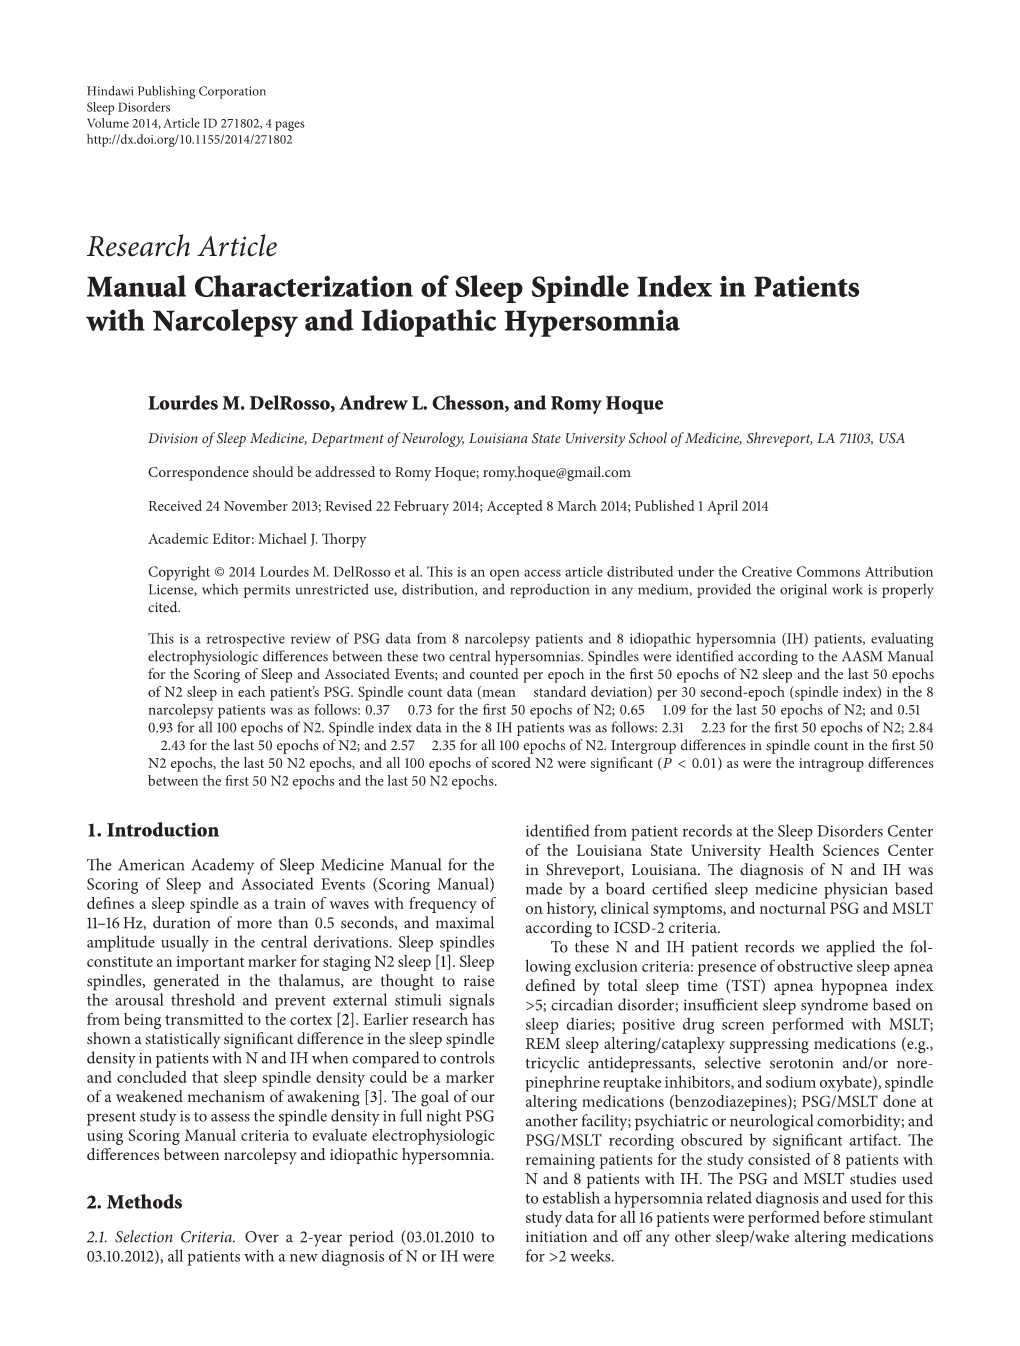 Manual Characterization of Sleep Spindle Index in Patients with Narcolepsy and Idiopathic Hypersomnia